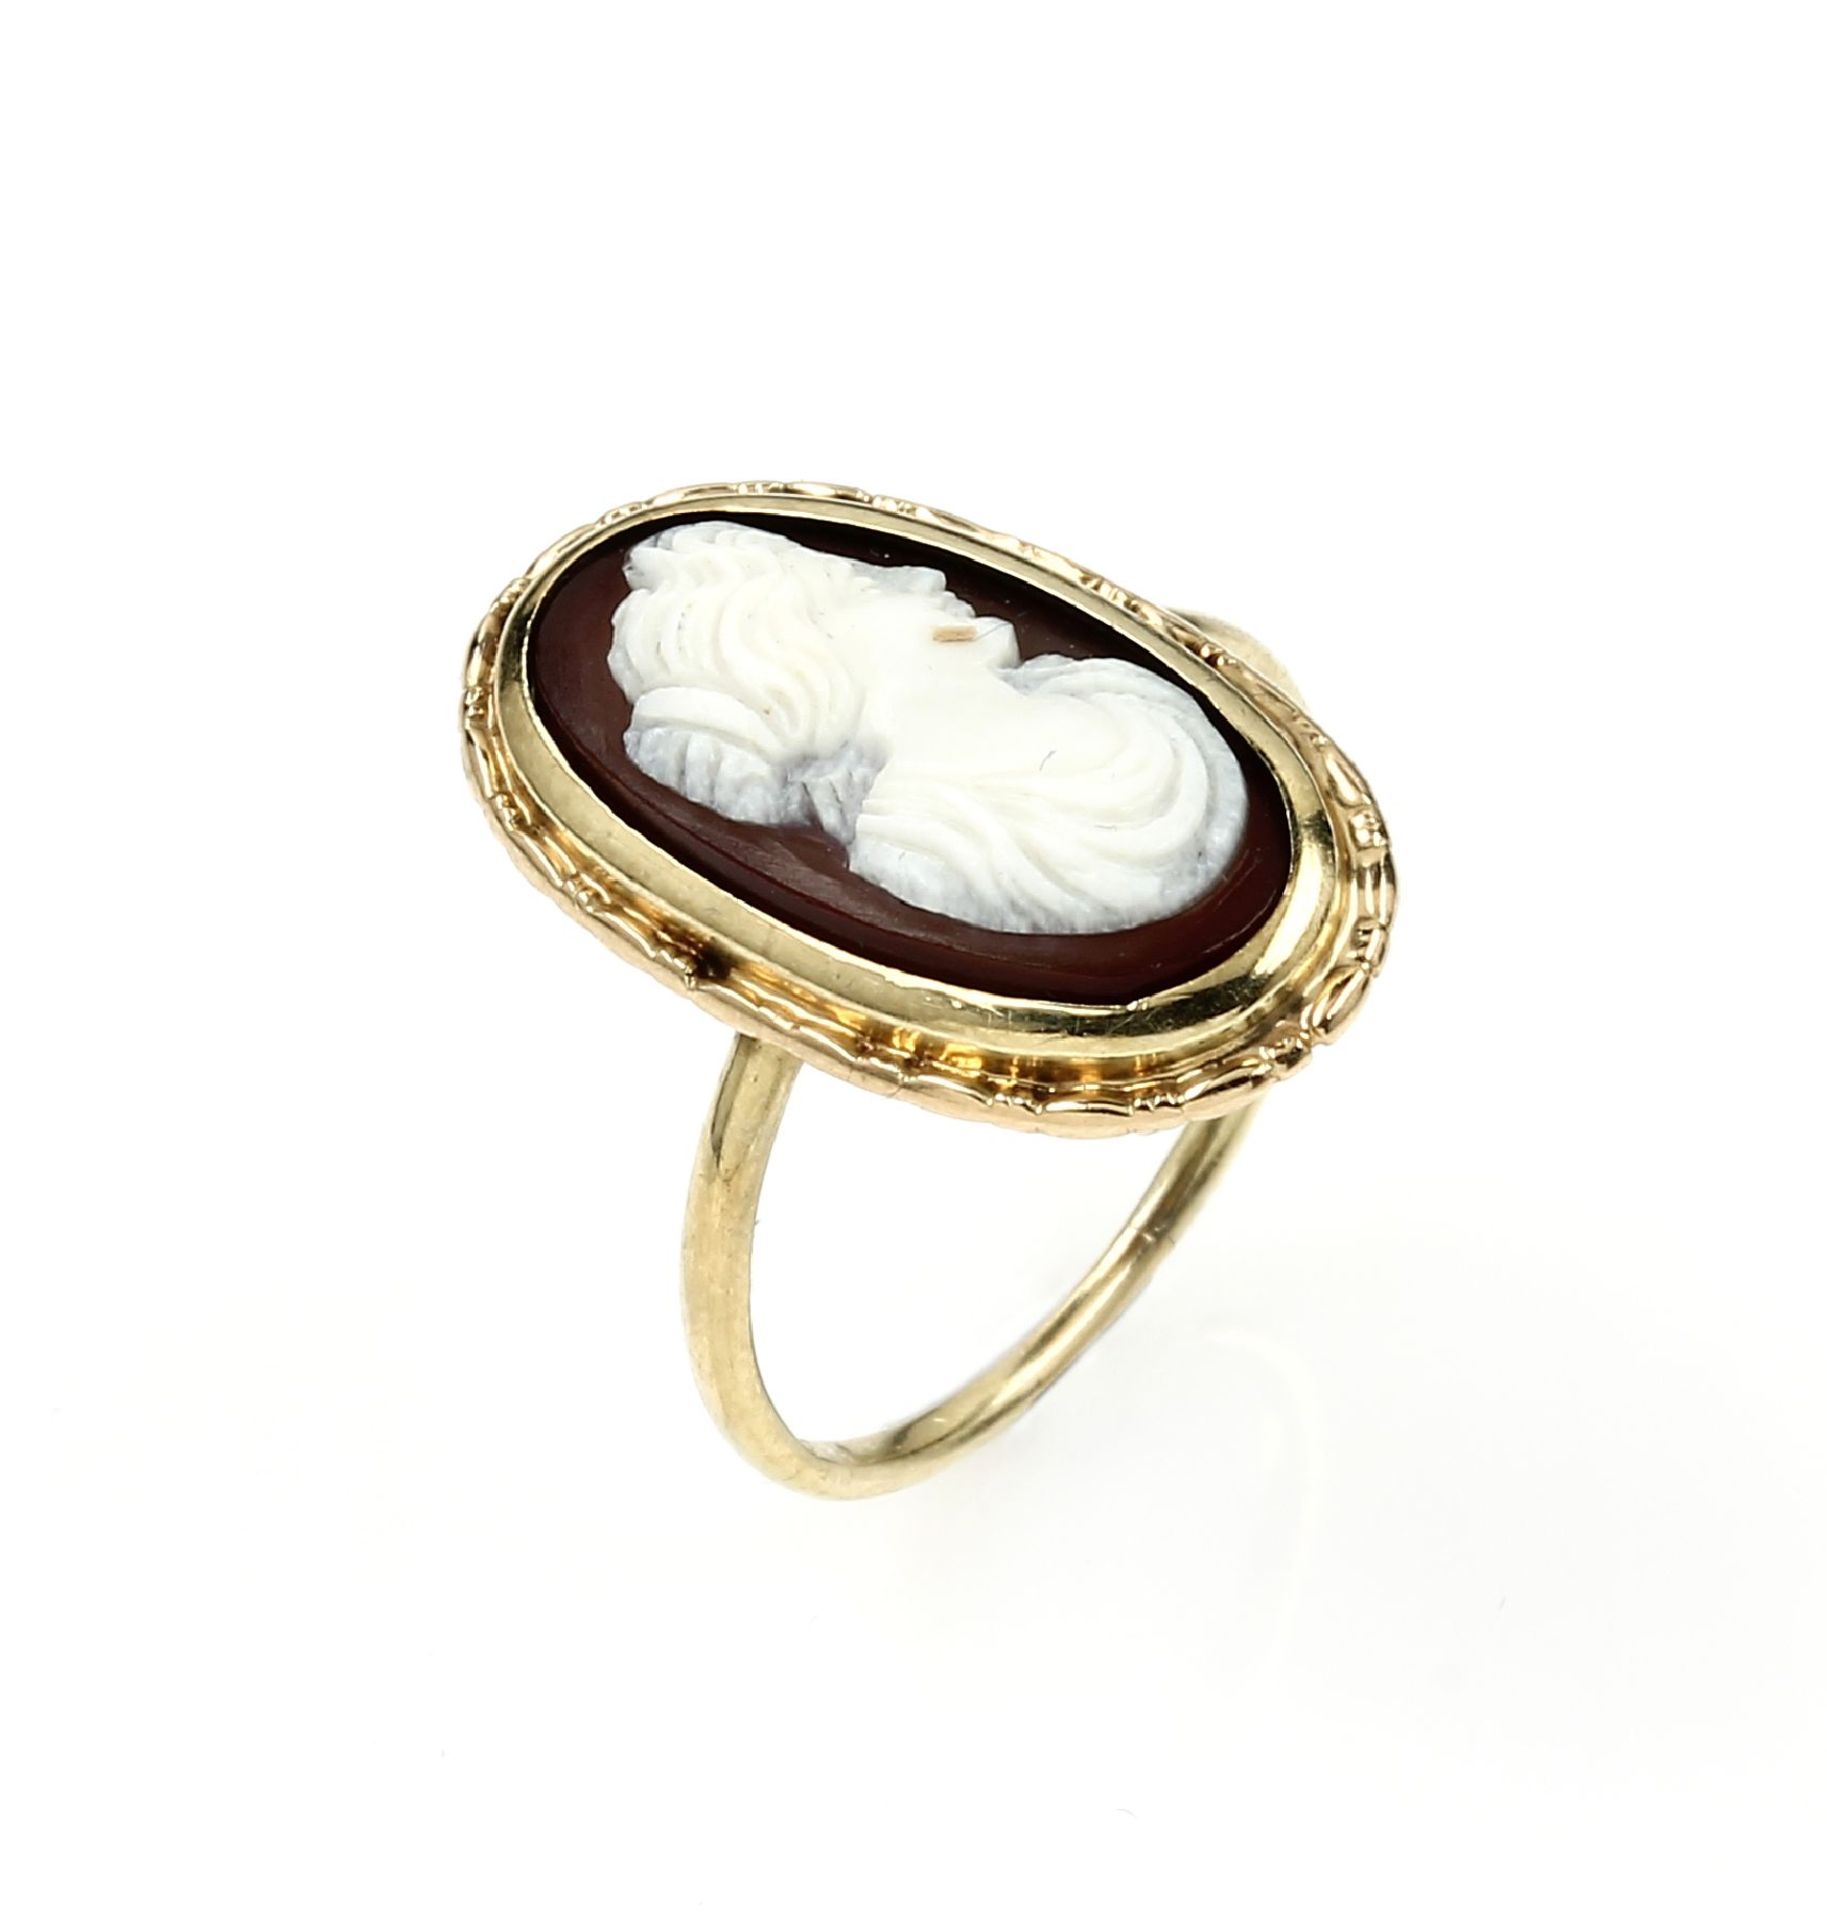 14 kt gold ring with layer stone cameo , approx. 1900s, YG 585/000, oval layer stone cameo with